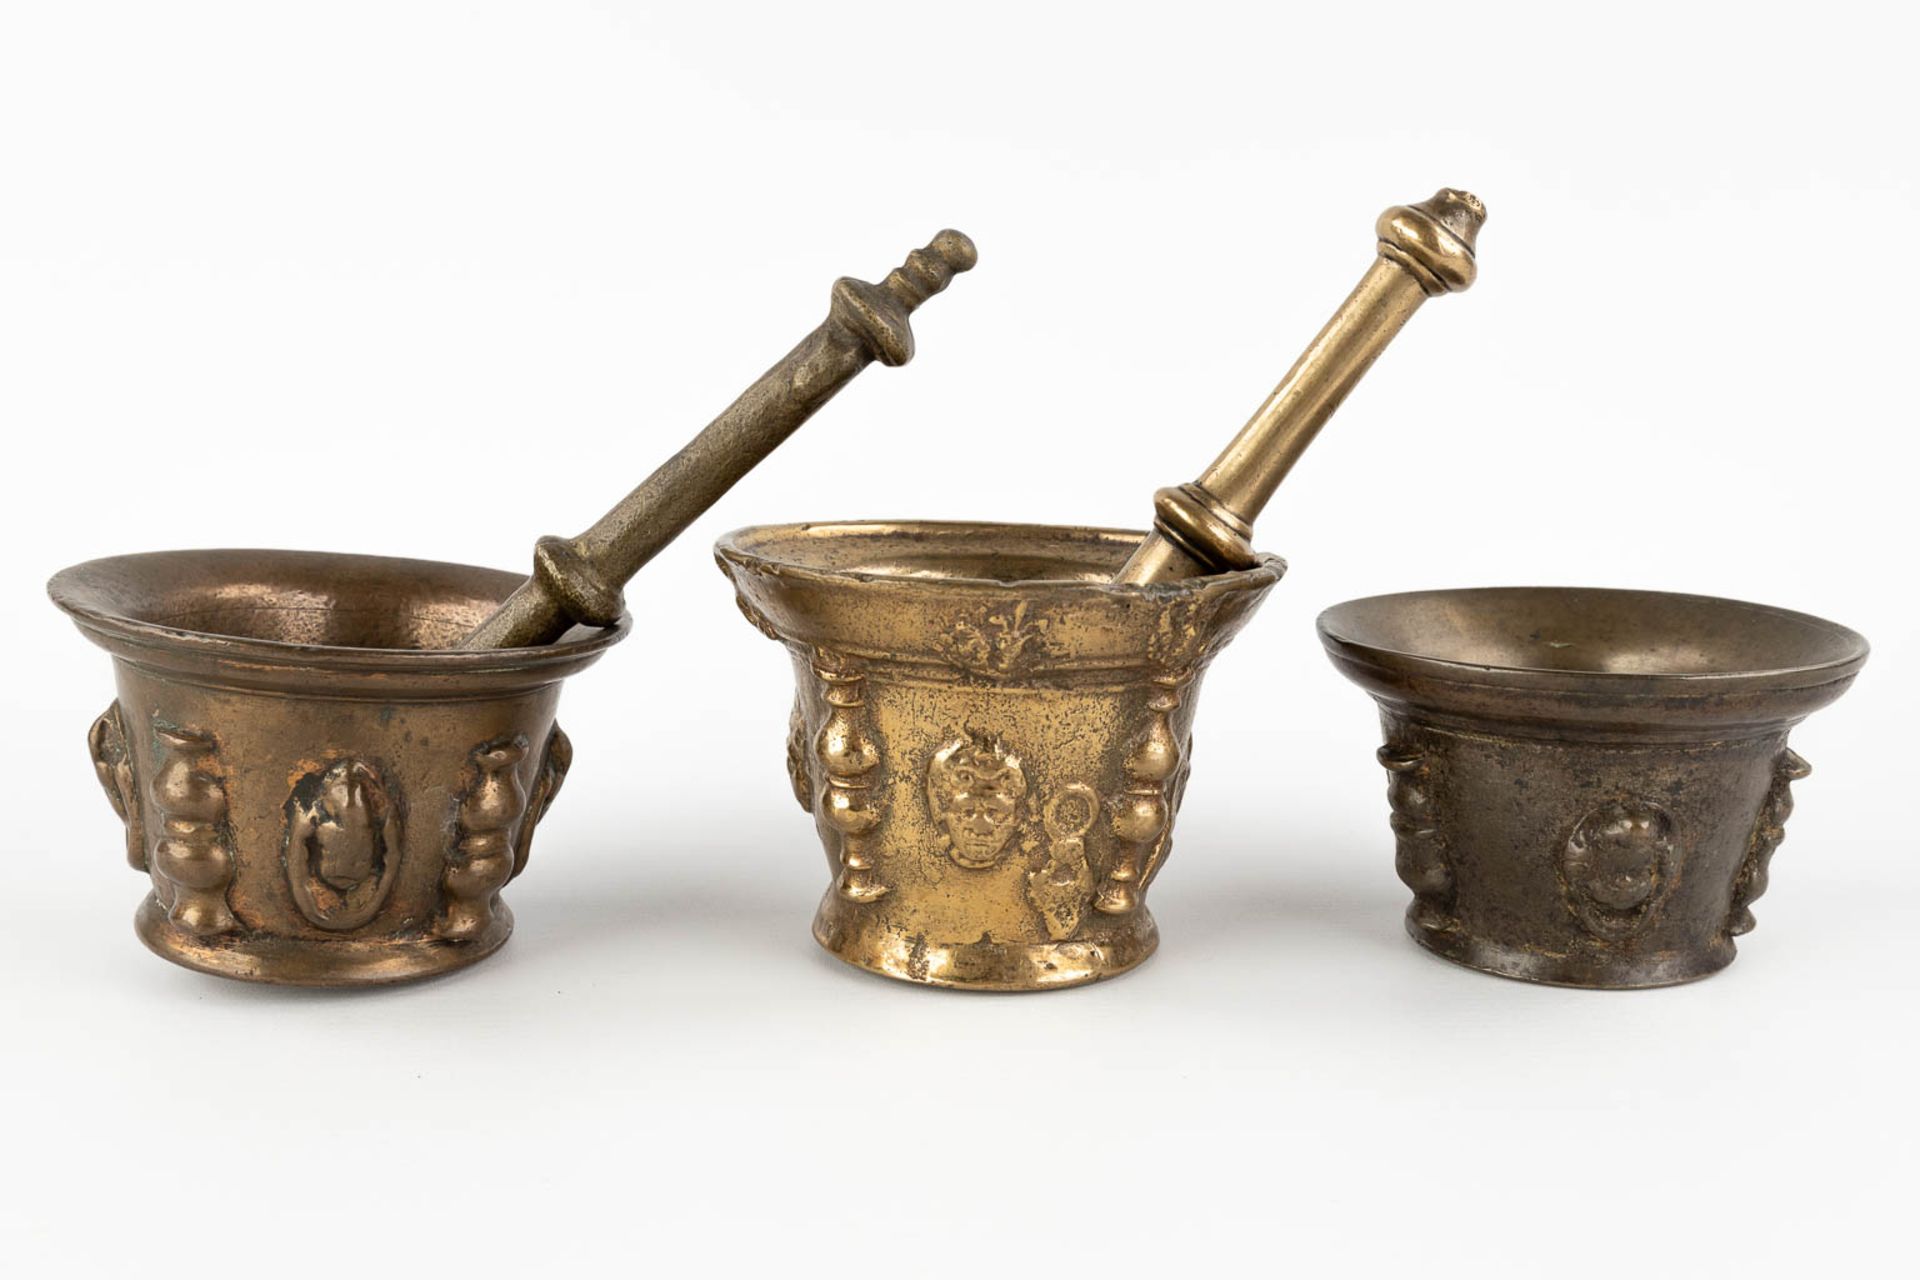 Three antique mortars with two pestles, bronze. Probably Spain, 17th/18th C. (H:9 x D:13 cm) - Image 5 of 12